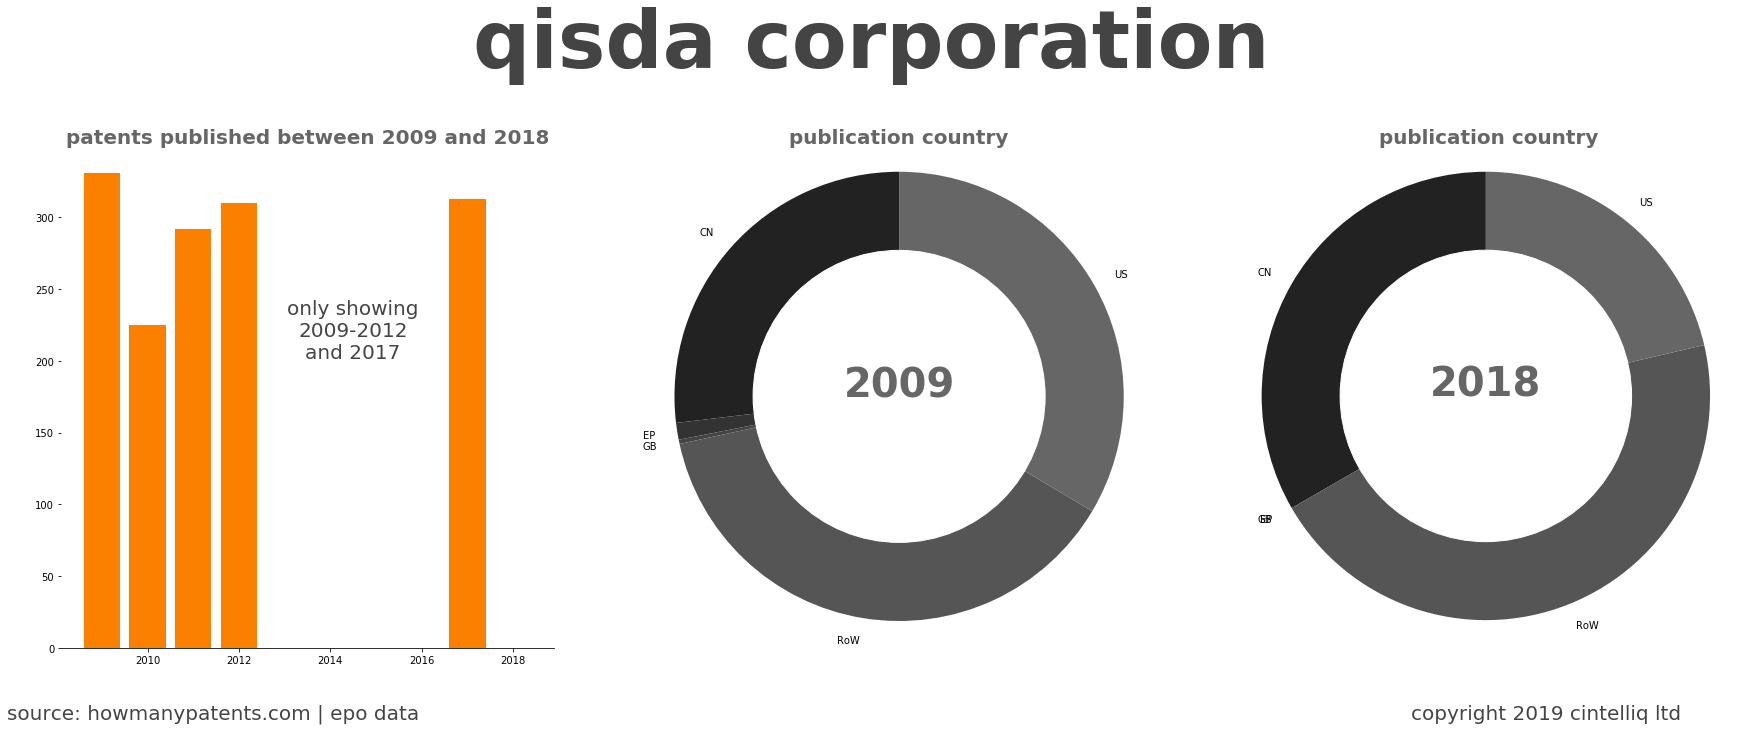 summary of patents for Qisda Corporation